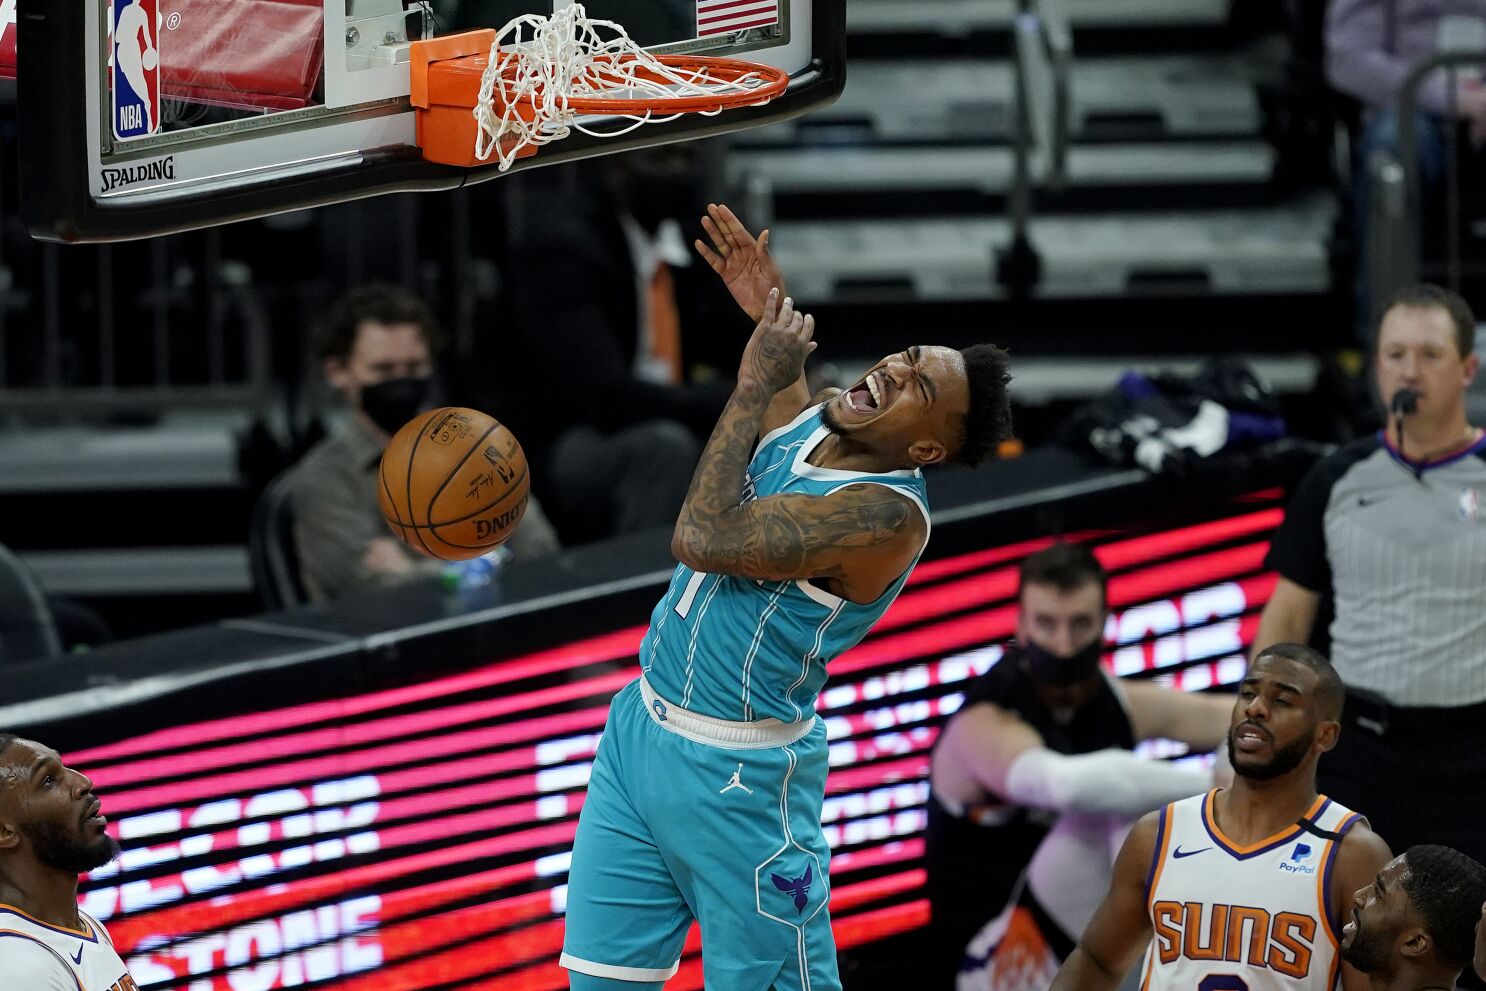 Malik Monk keeps being a bright spot for the Lakers